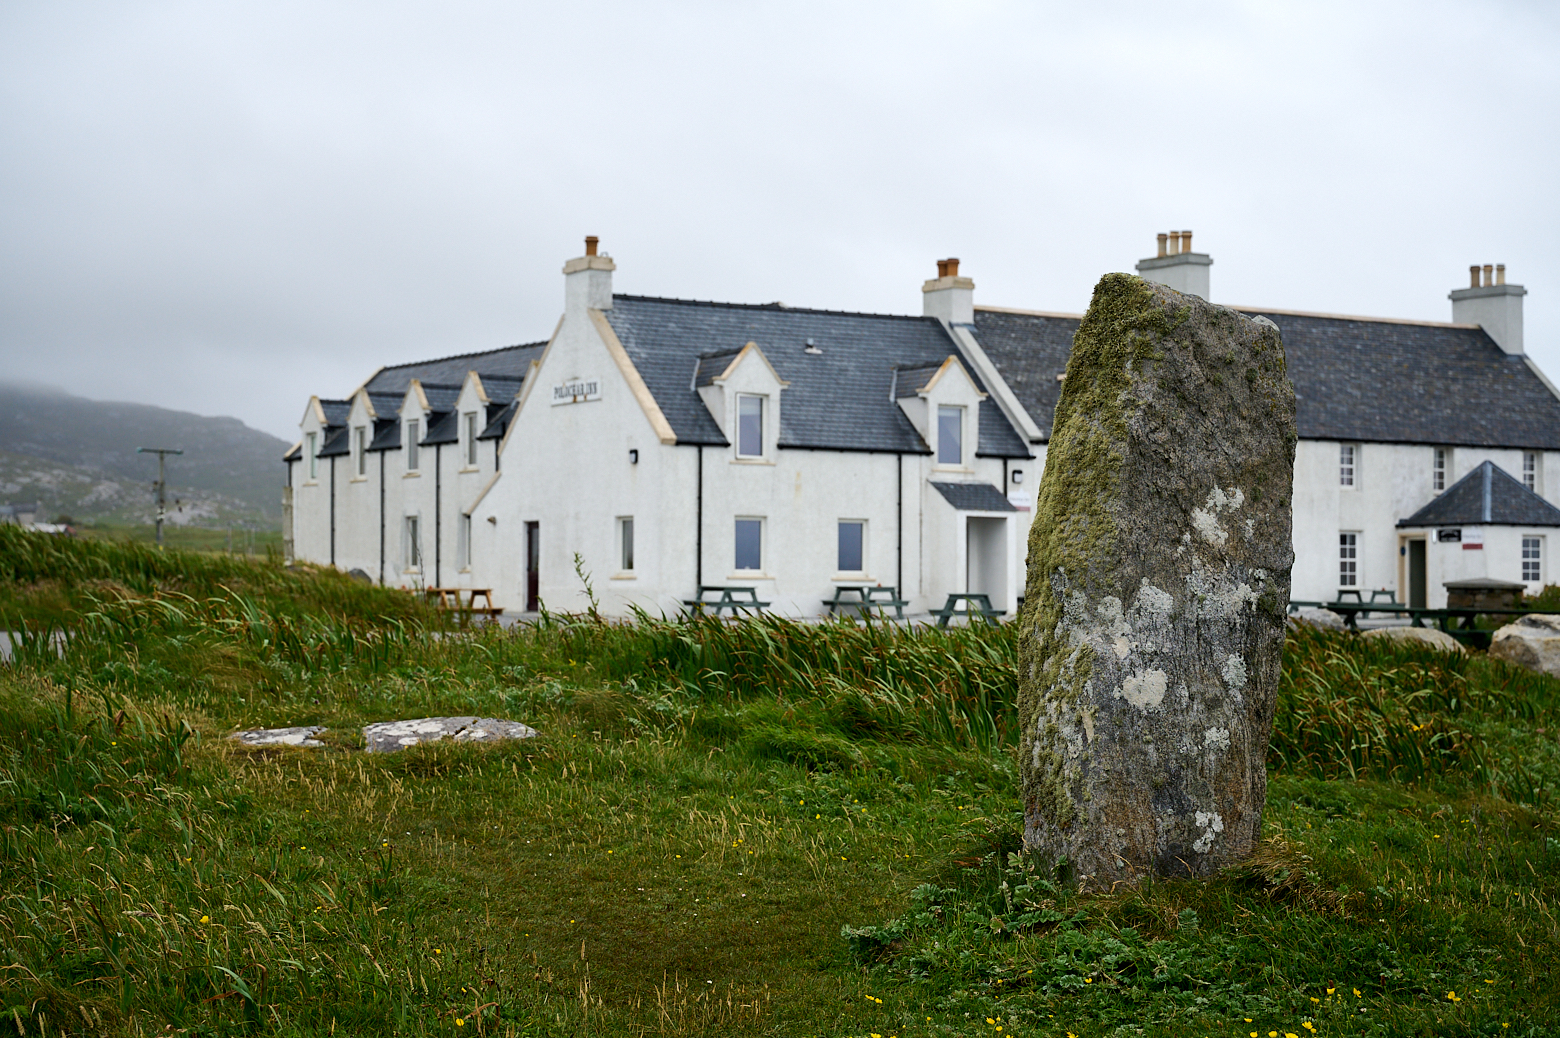 Polochar Standing Stone in South Uist.